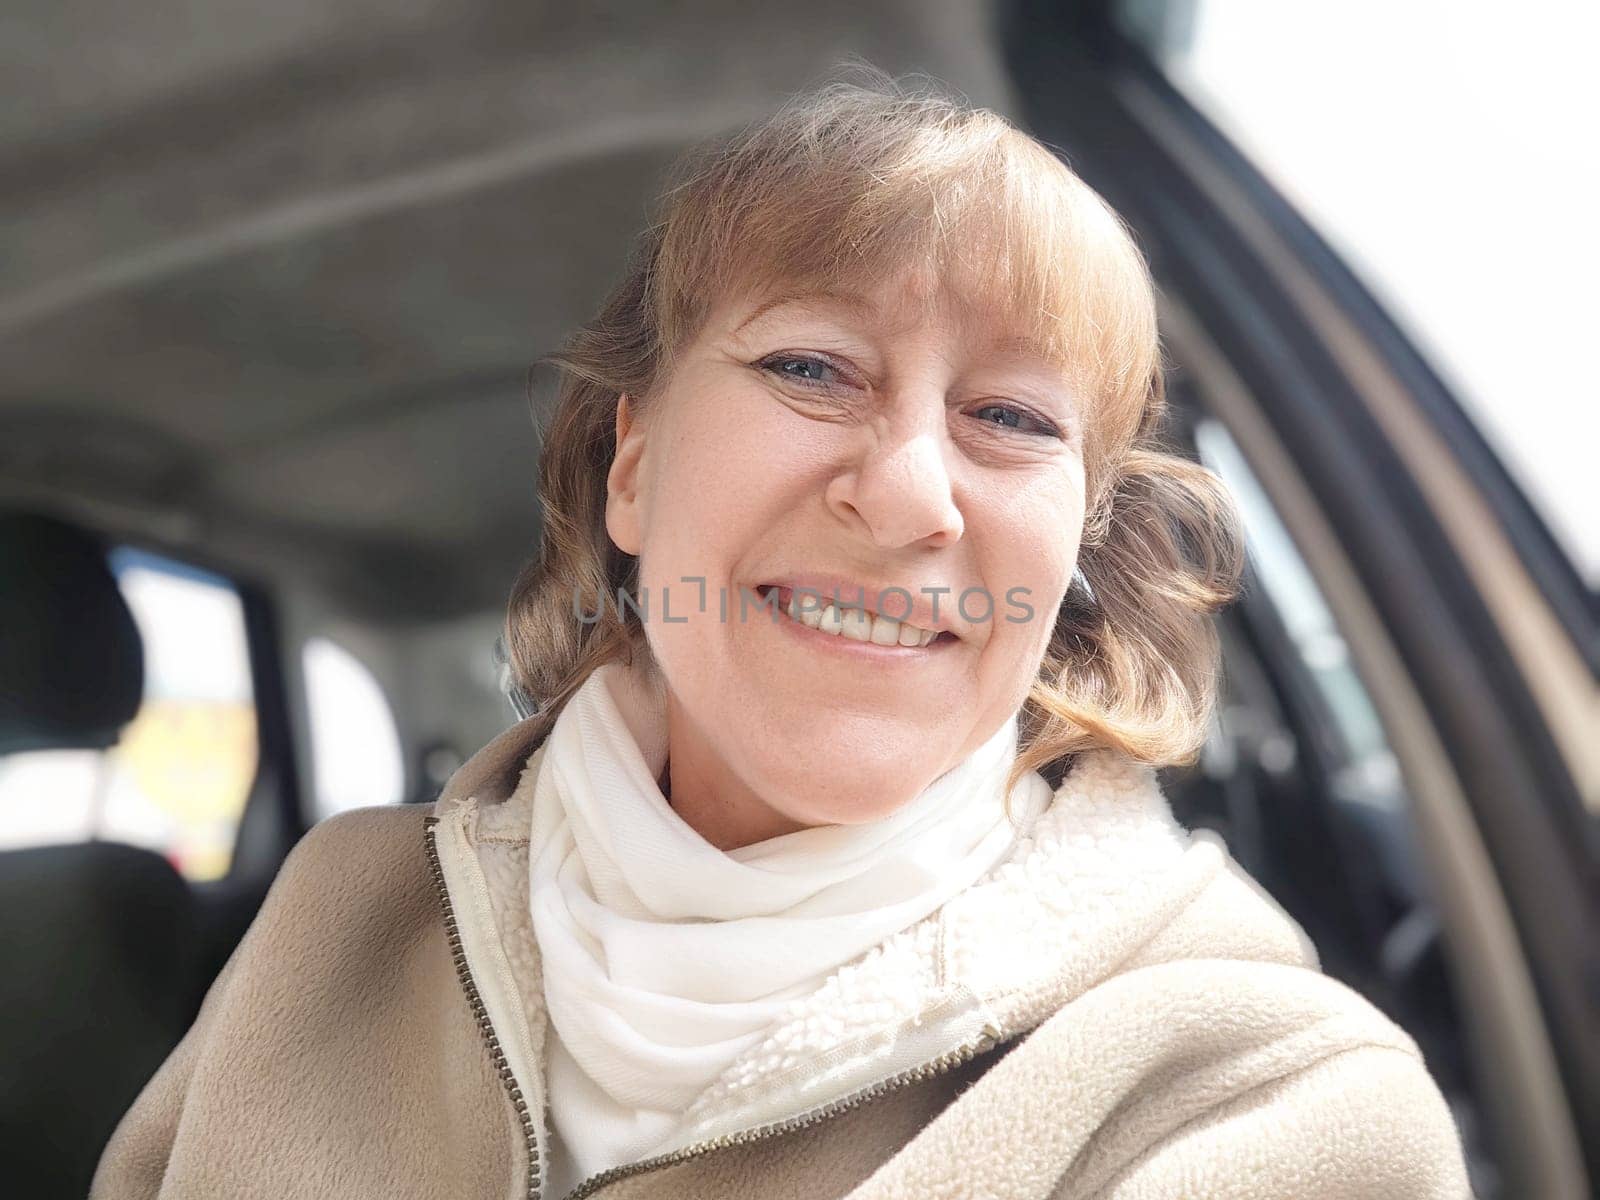 A middle-aged woman leans out of her car window, smiling as she takes selfie on a bright sunny day